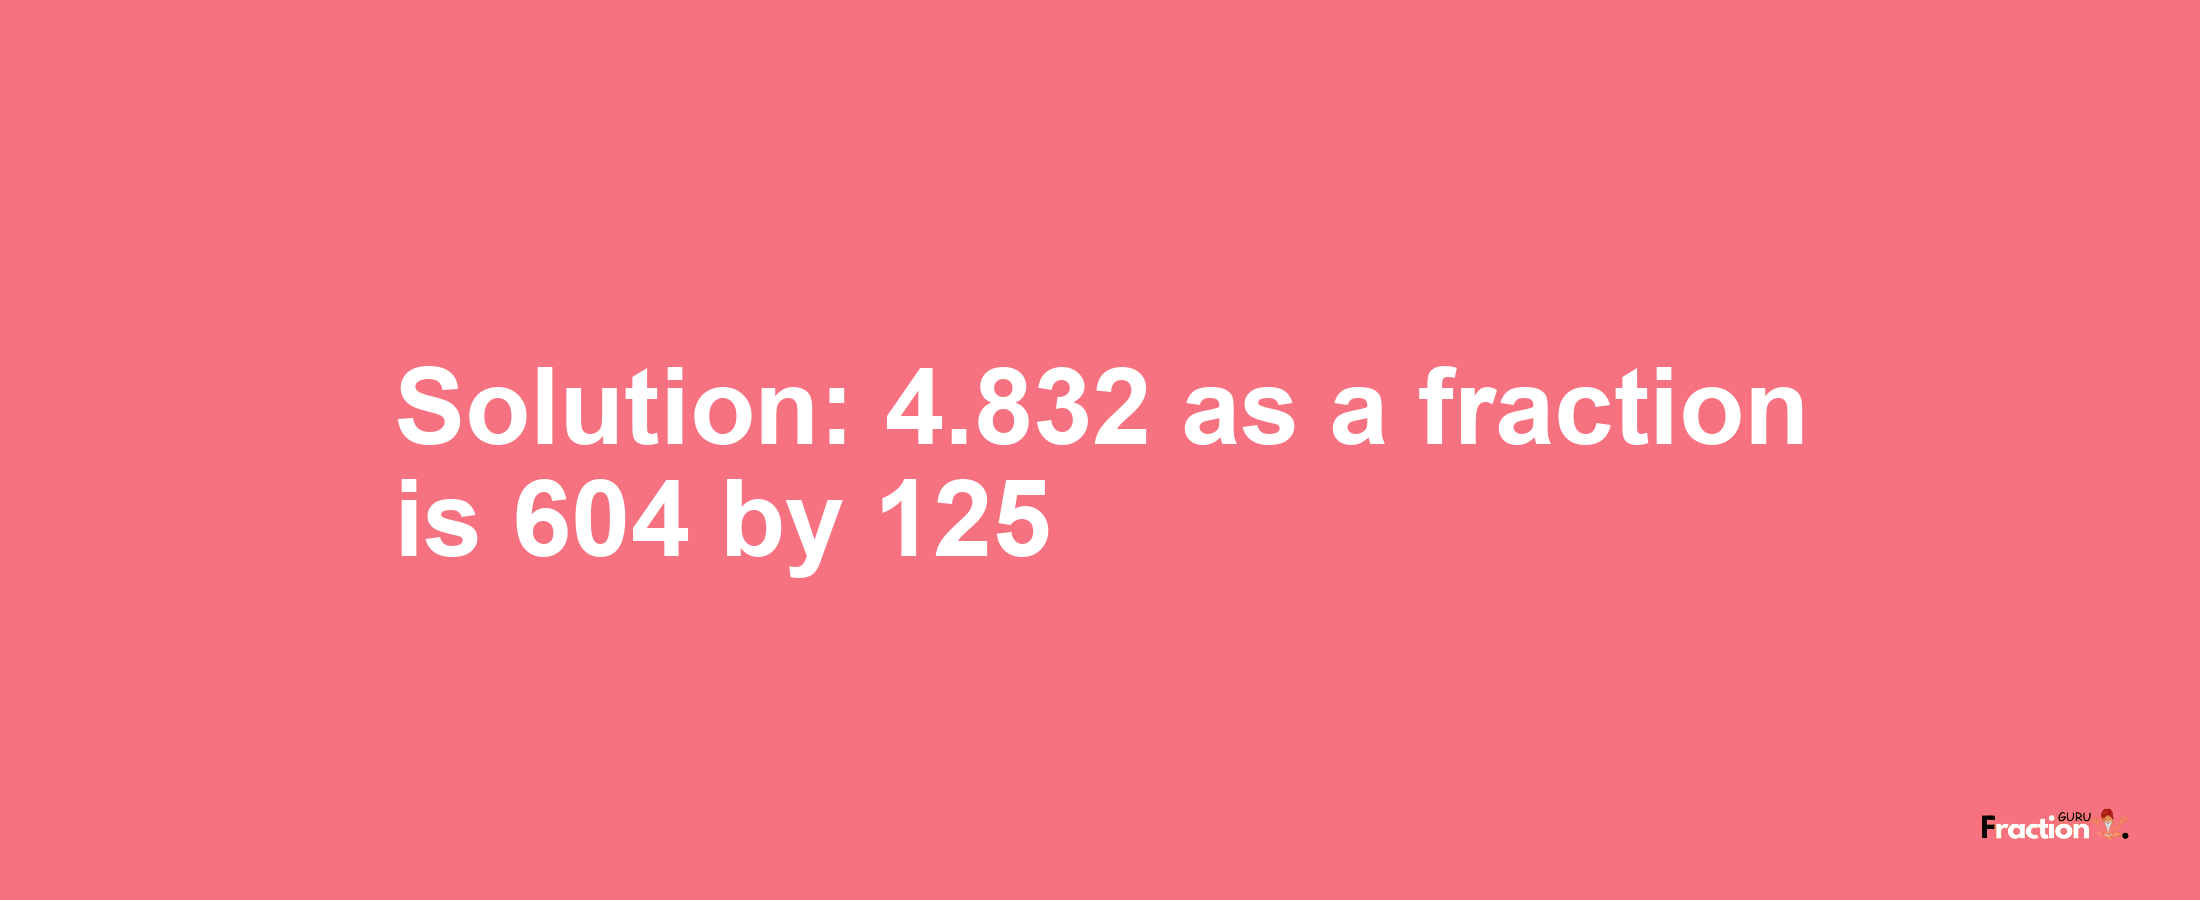 Solution:4.832 as a fraction is 604/125